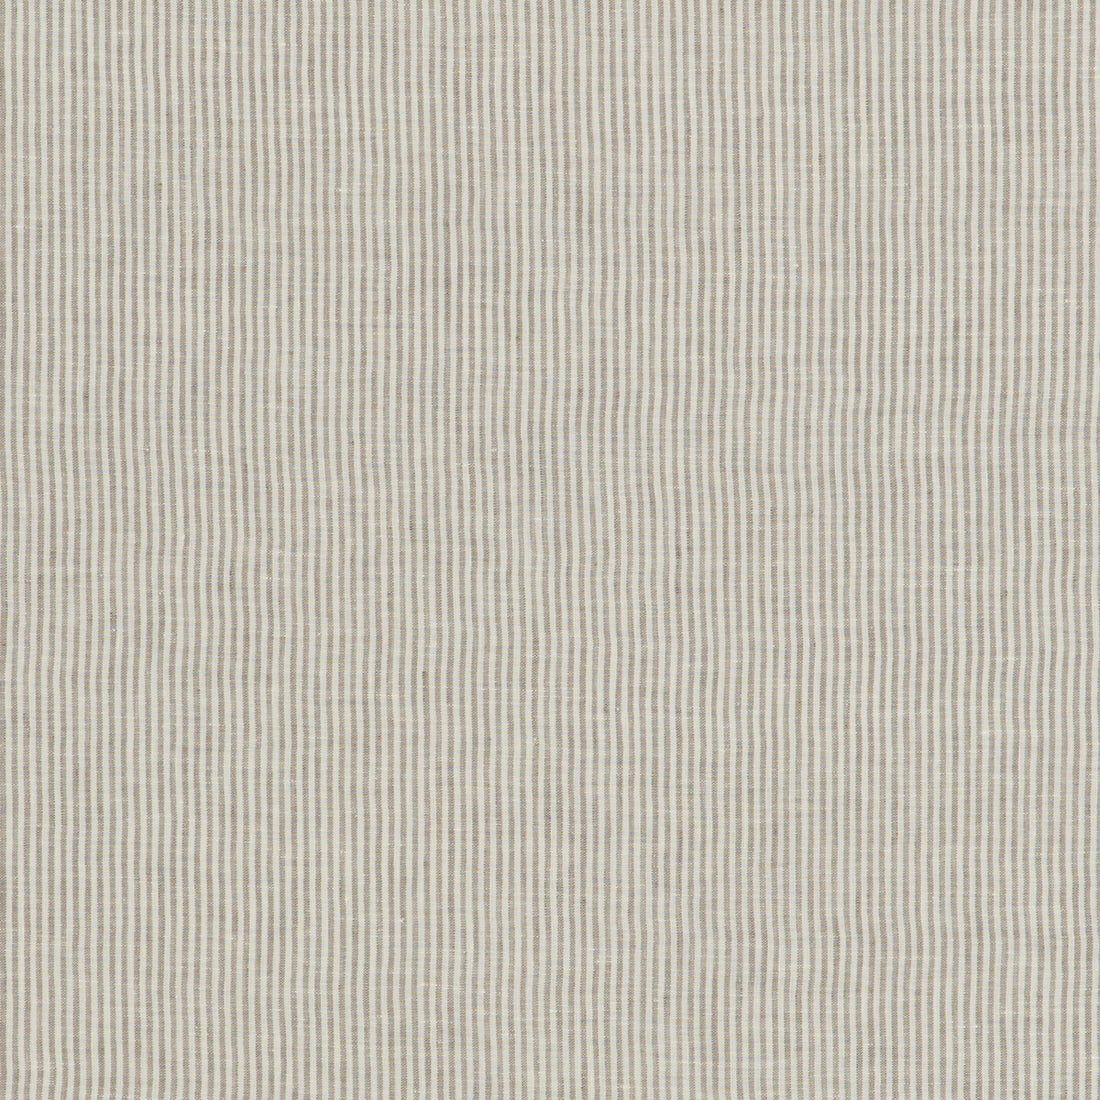 Nala Ticking fabric in dove color - pattern ED85331.910.0 - by Threads in the Nala Linens collection